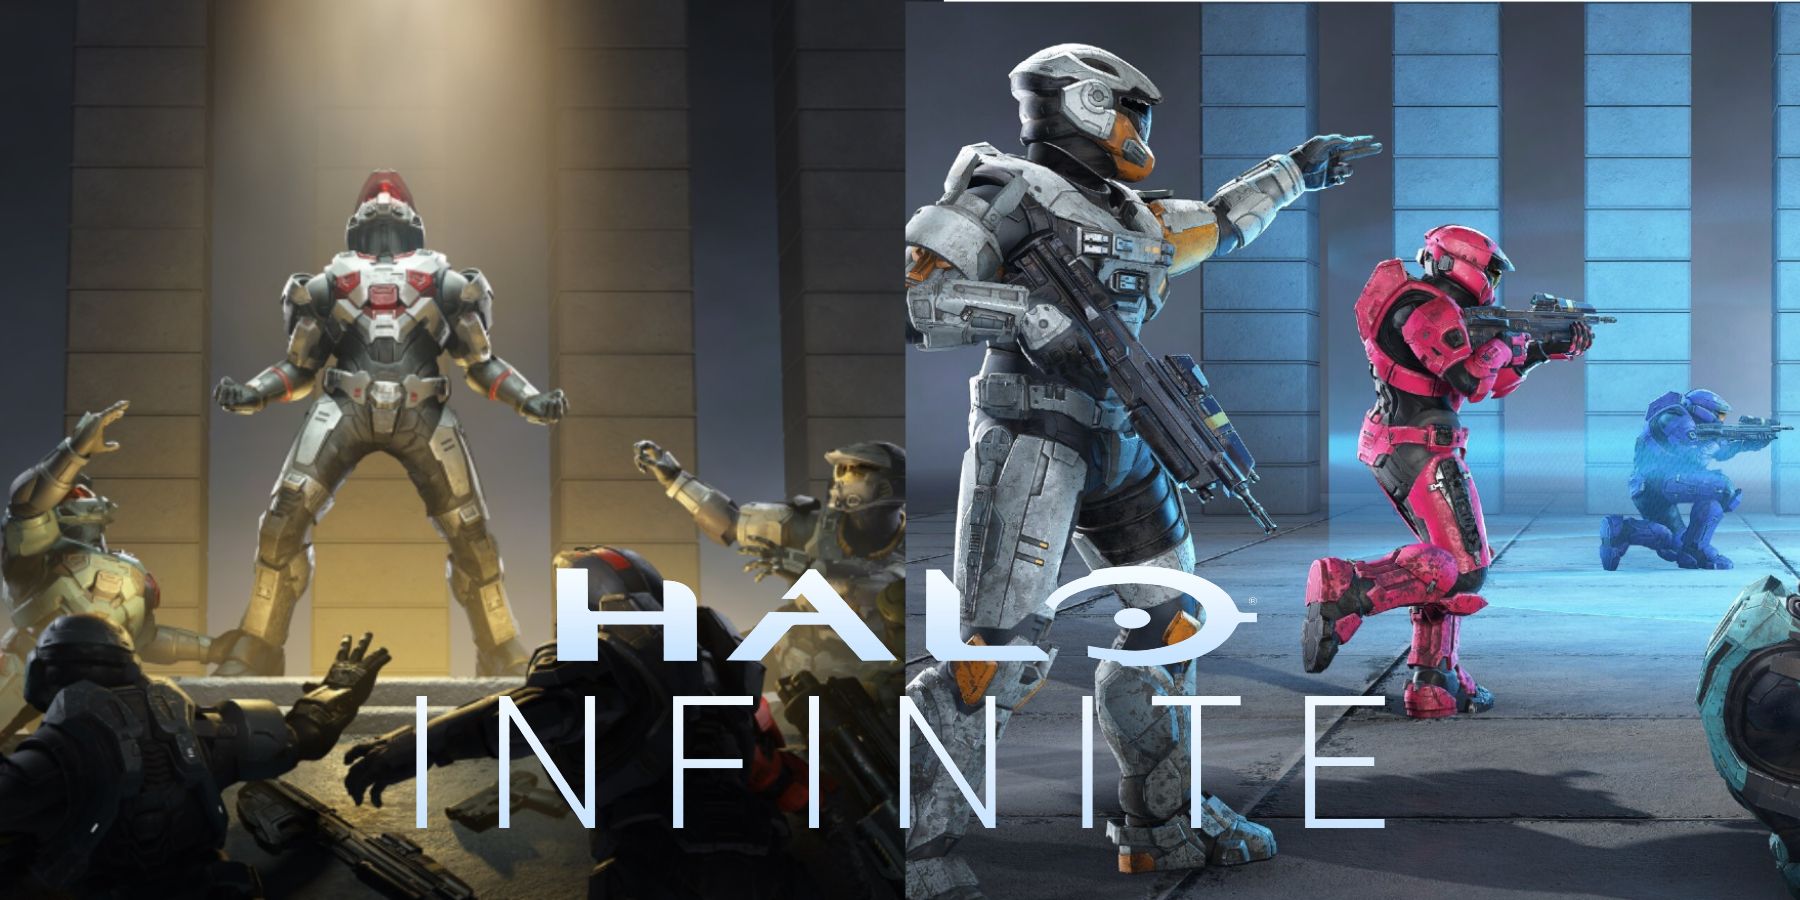 Halo Infinite Multiplayer Season 2 Is Called Lone Wolves And It